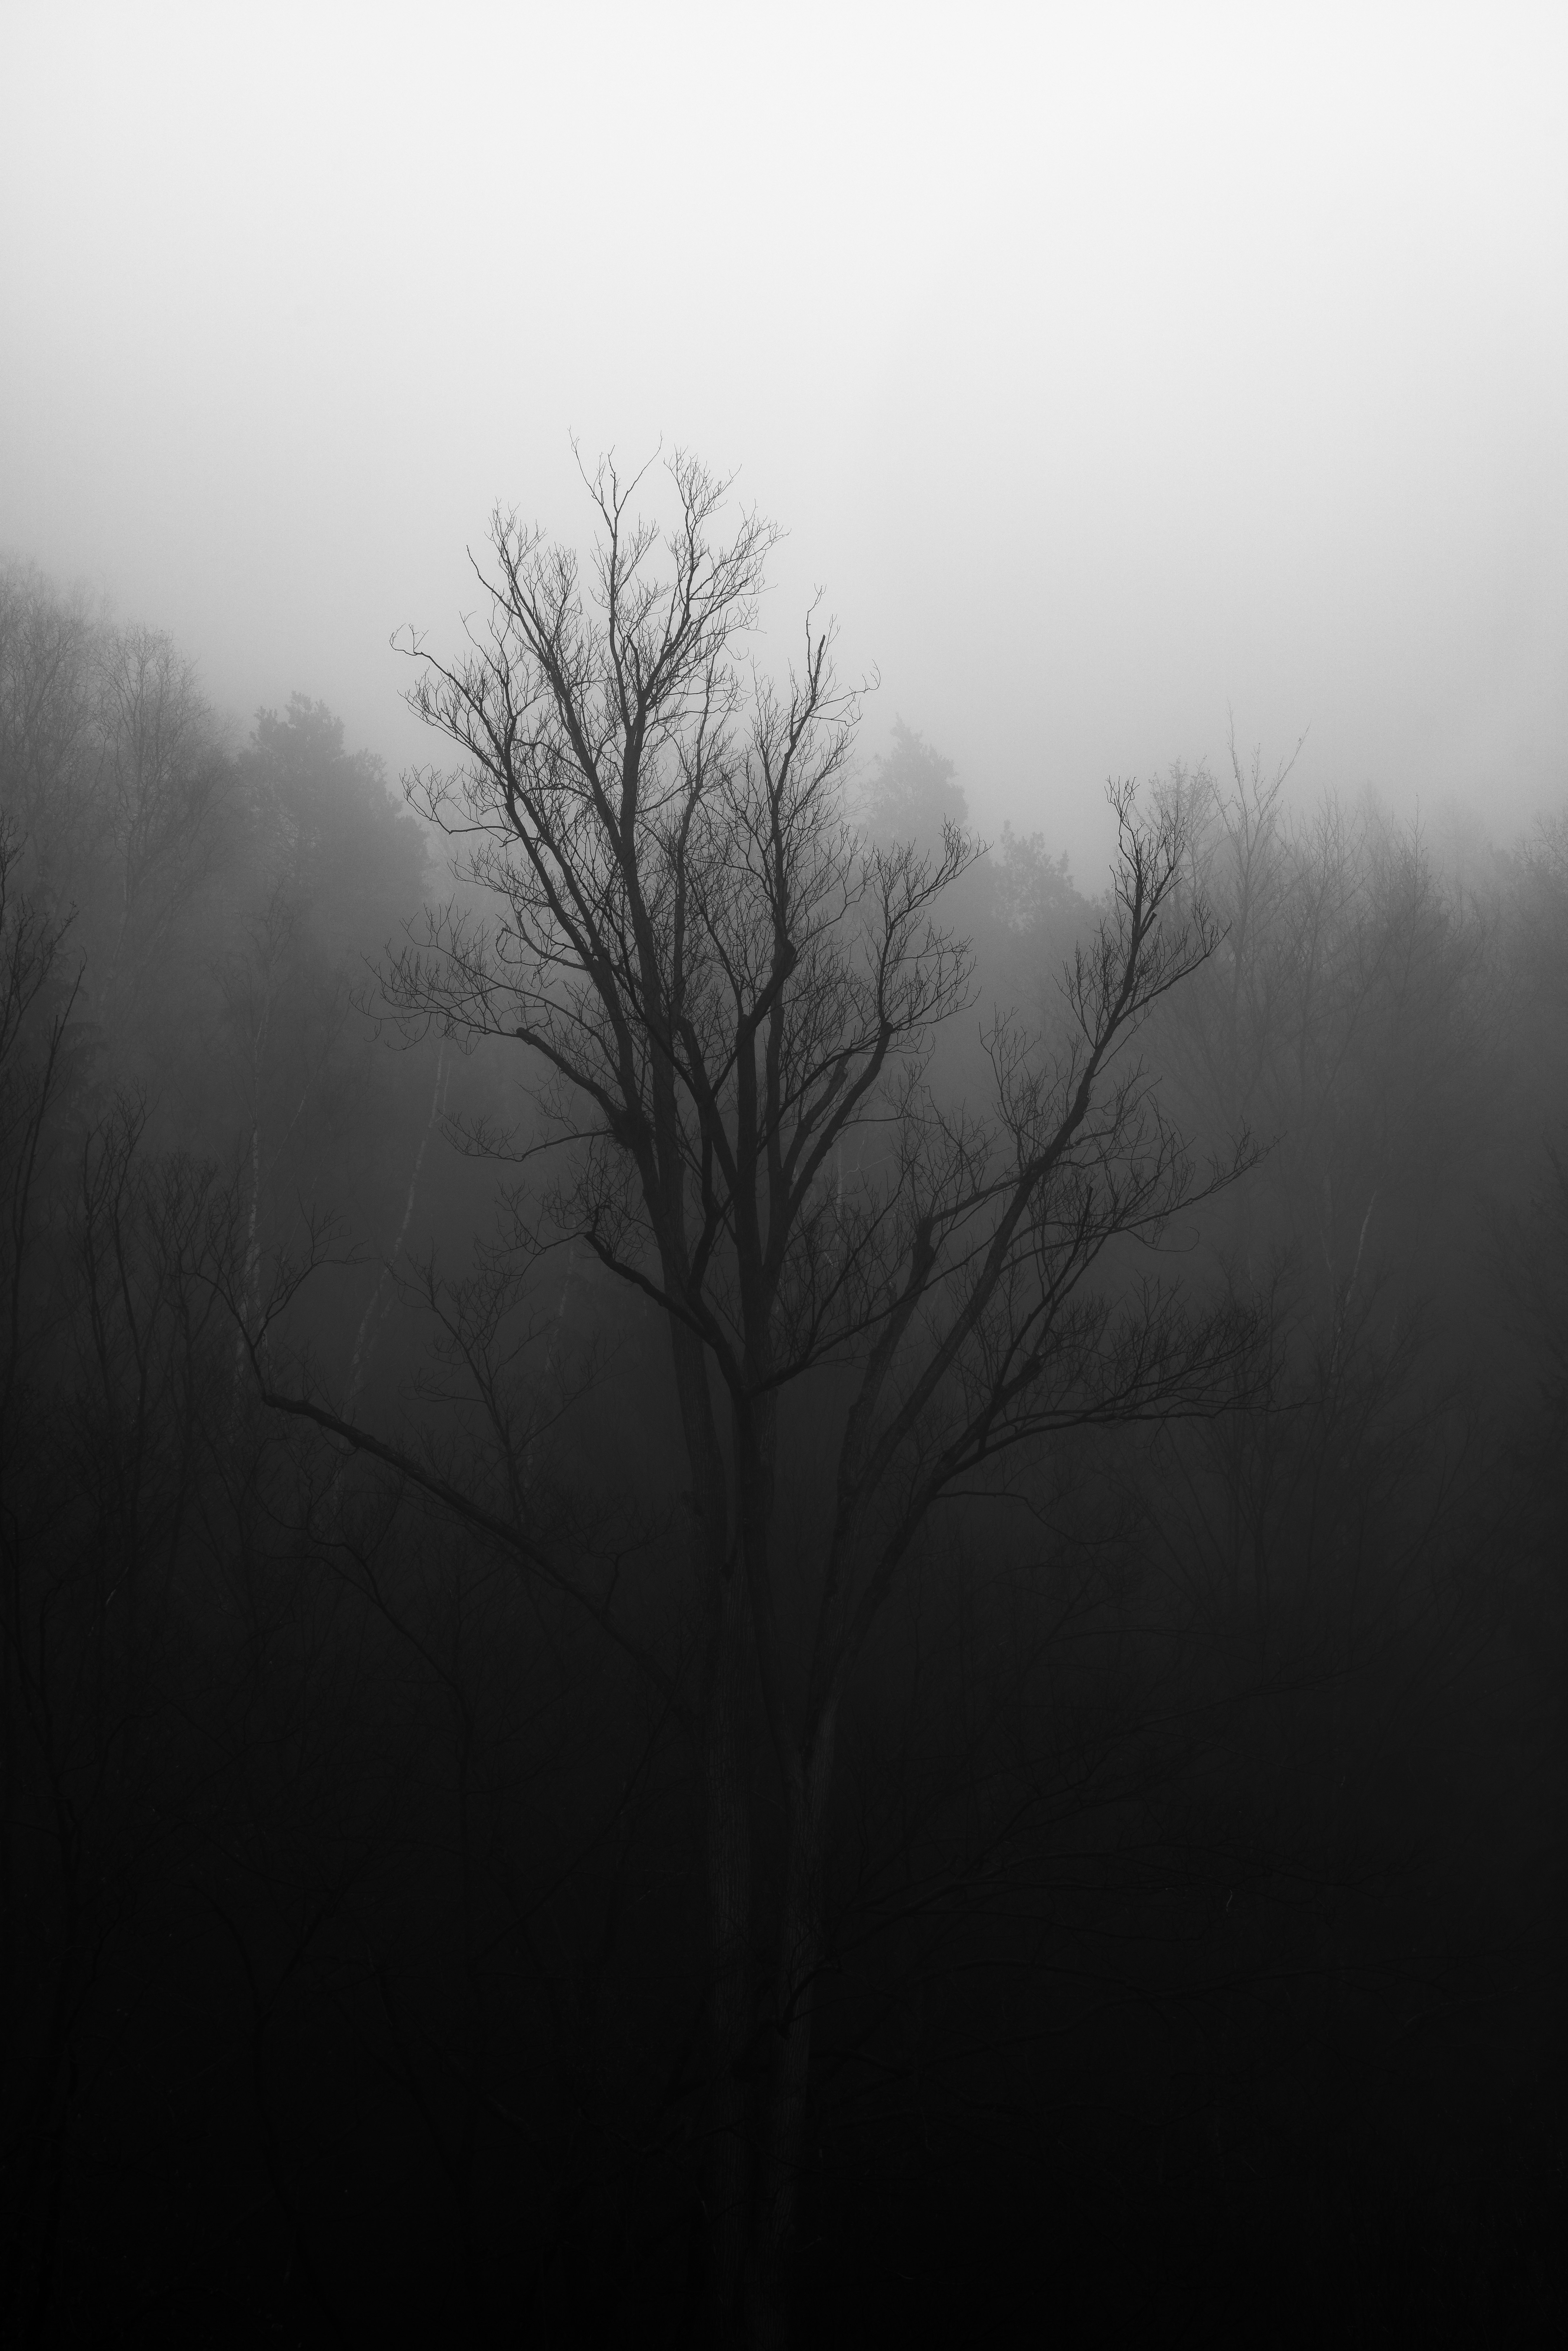 bare trees on foggy weather